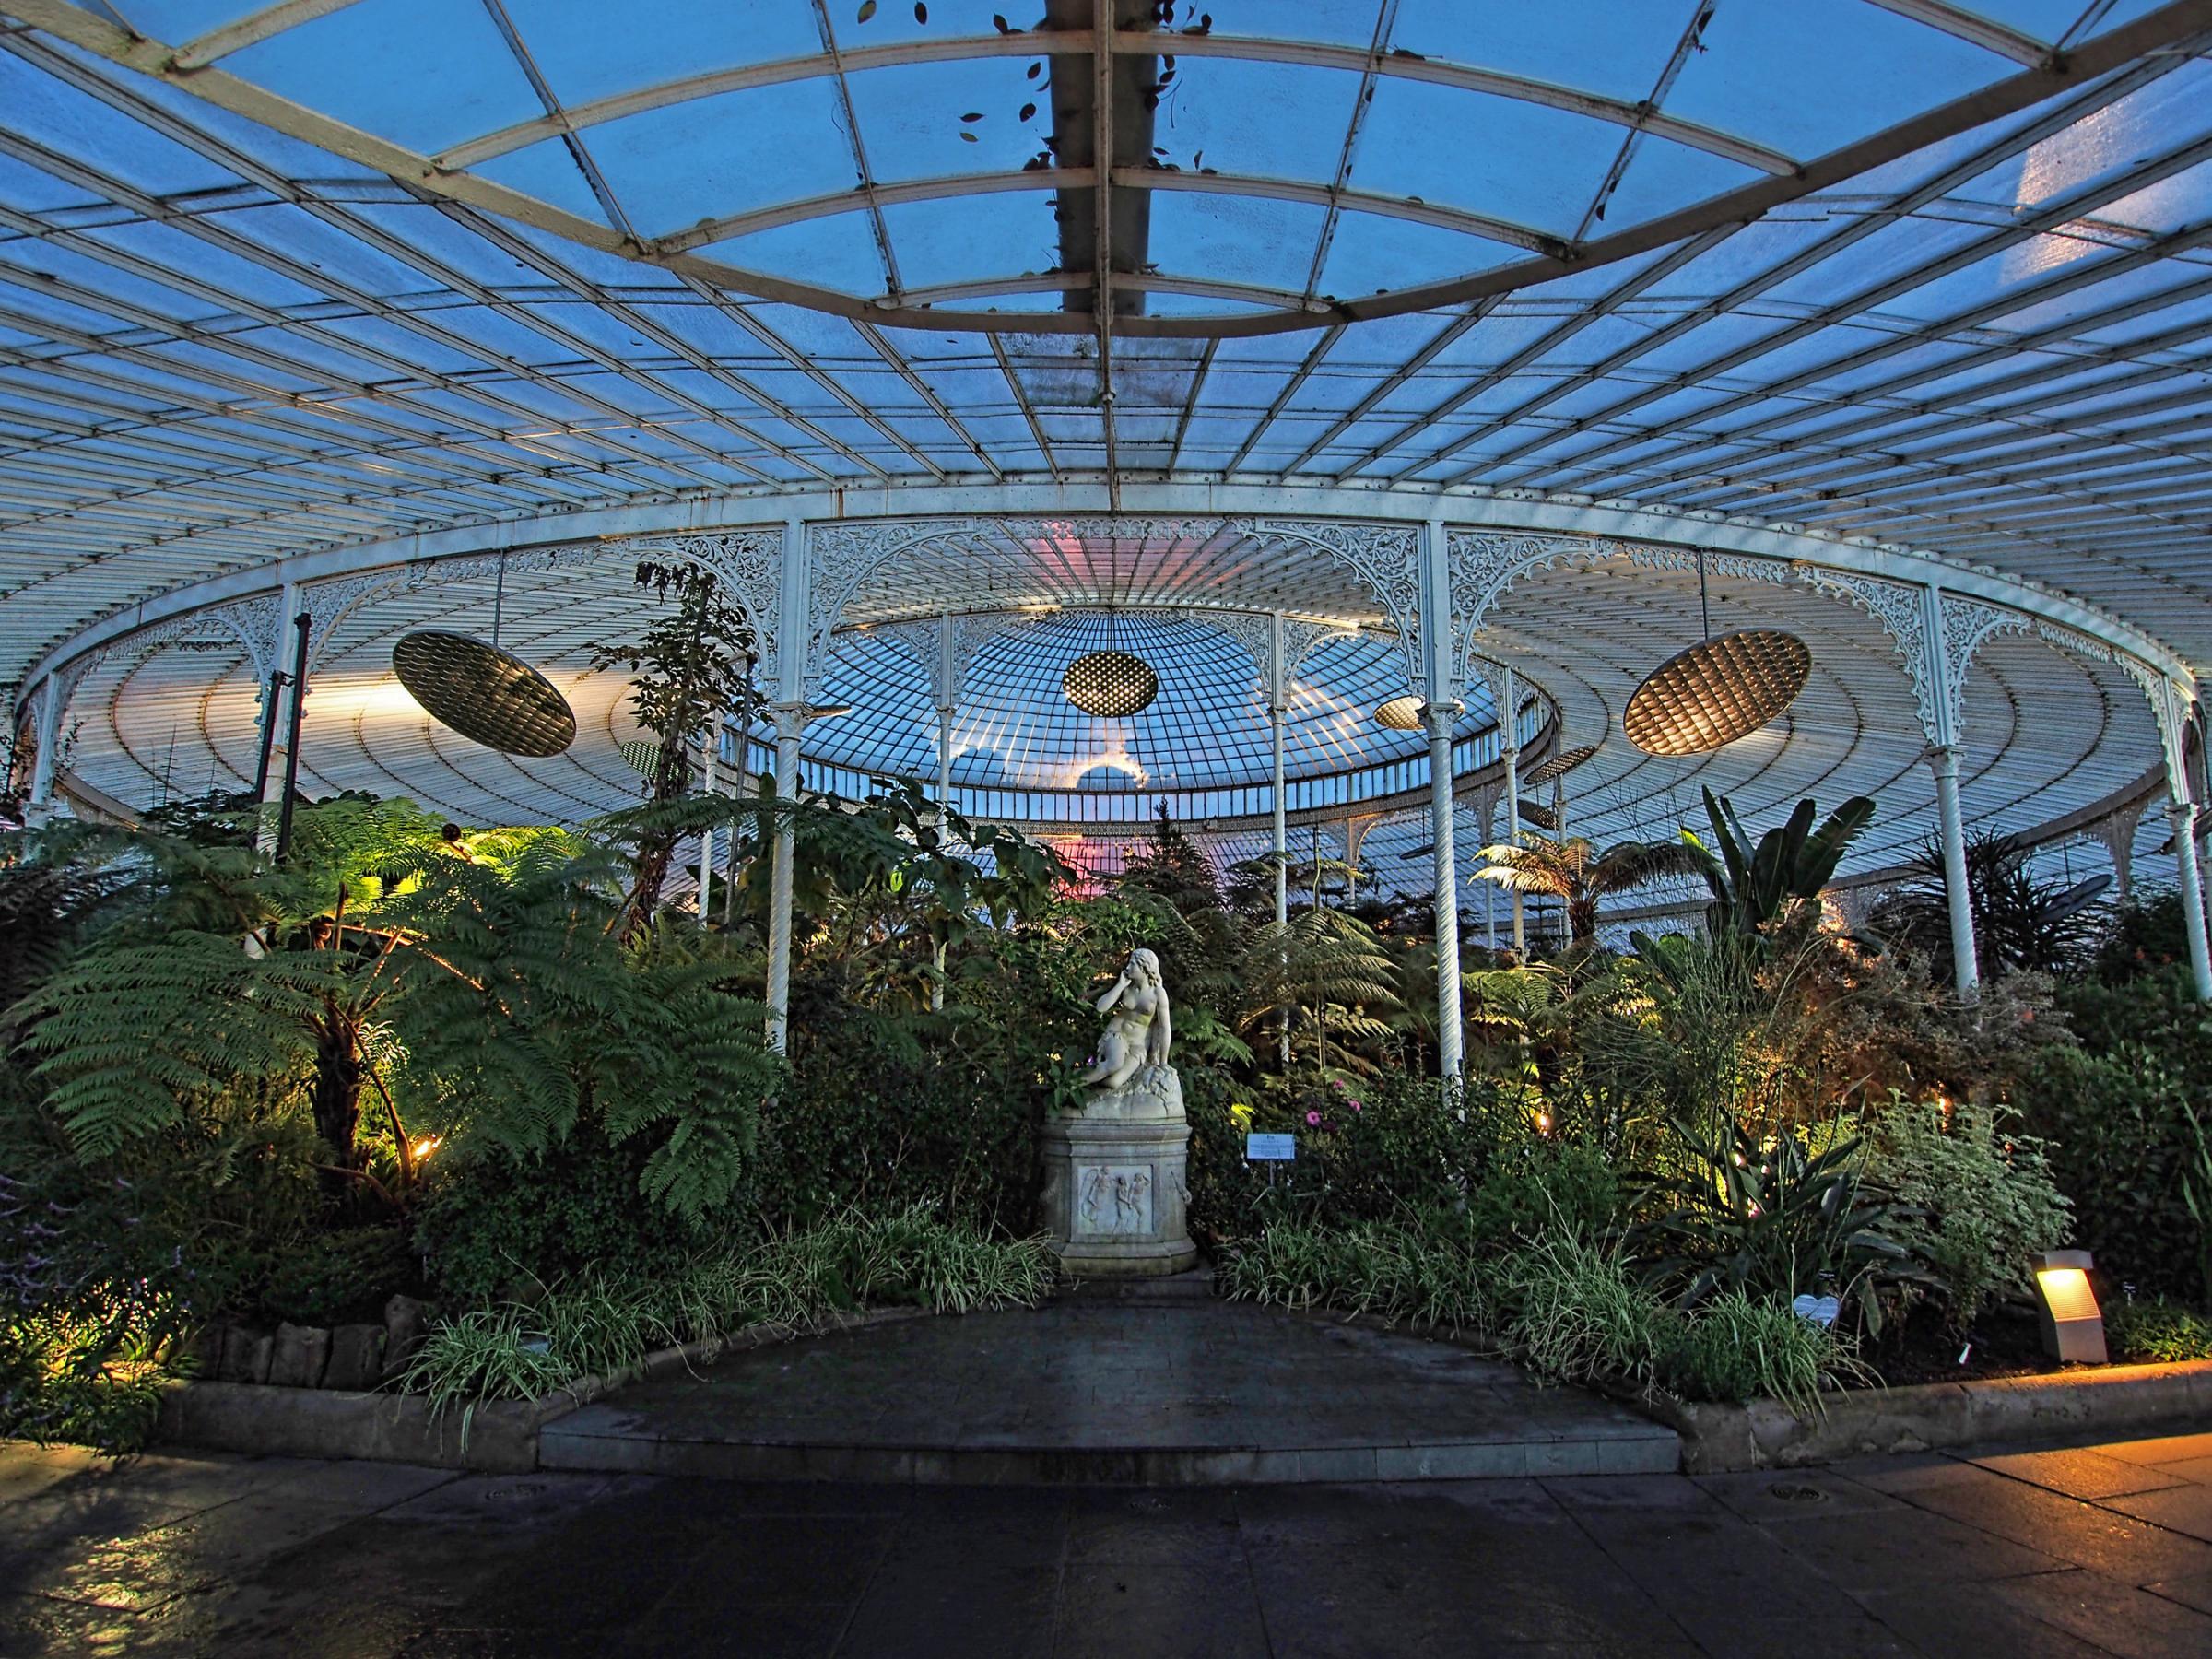 The Kibble Palace was originally a glasshouse at the Coulport home of Victorian entrepreneur John Kibble